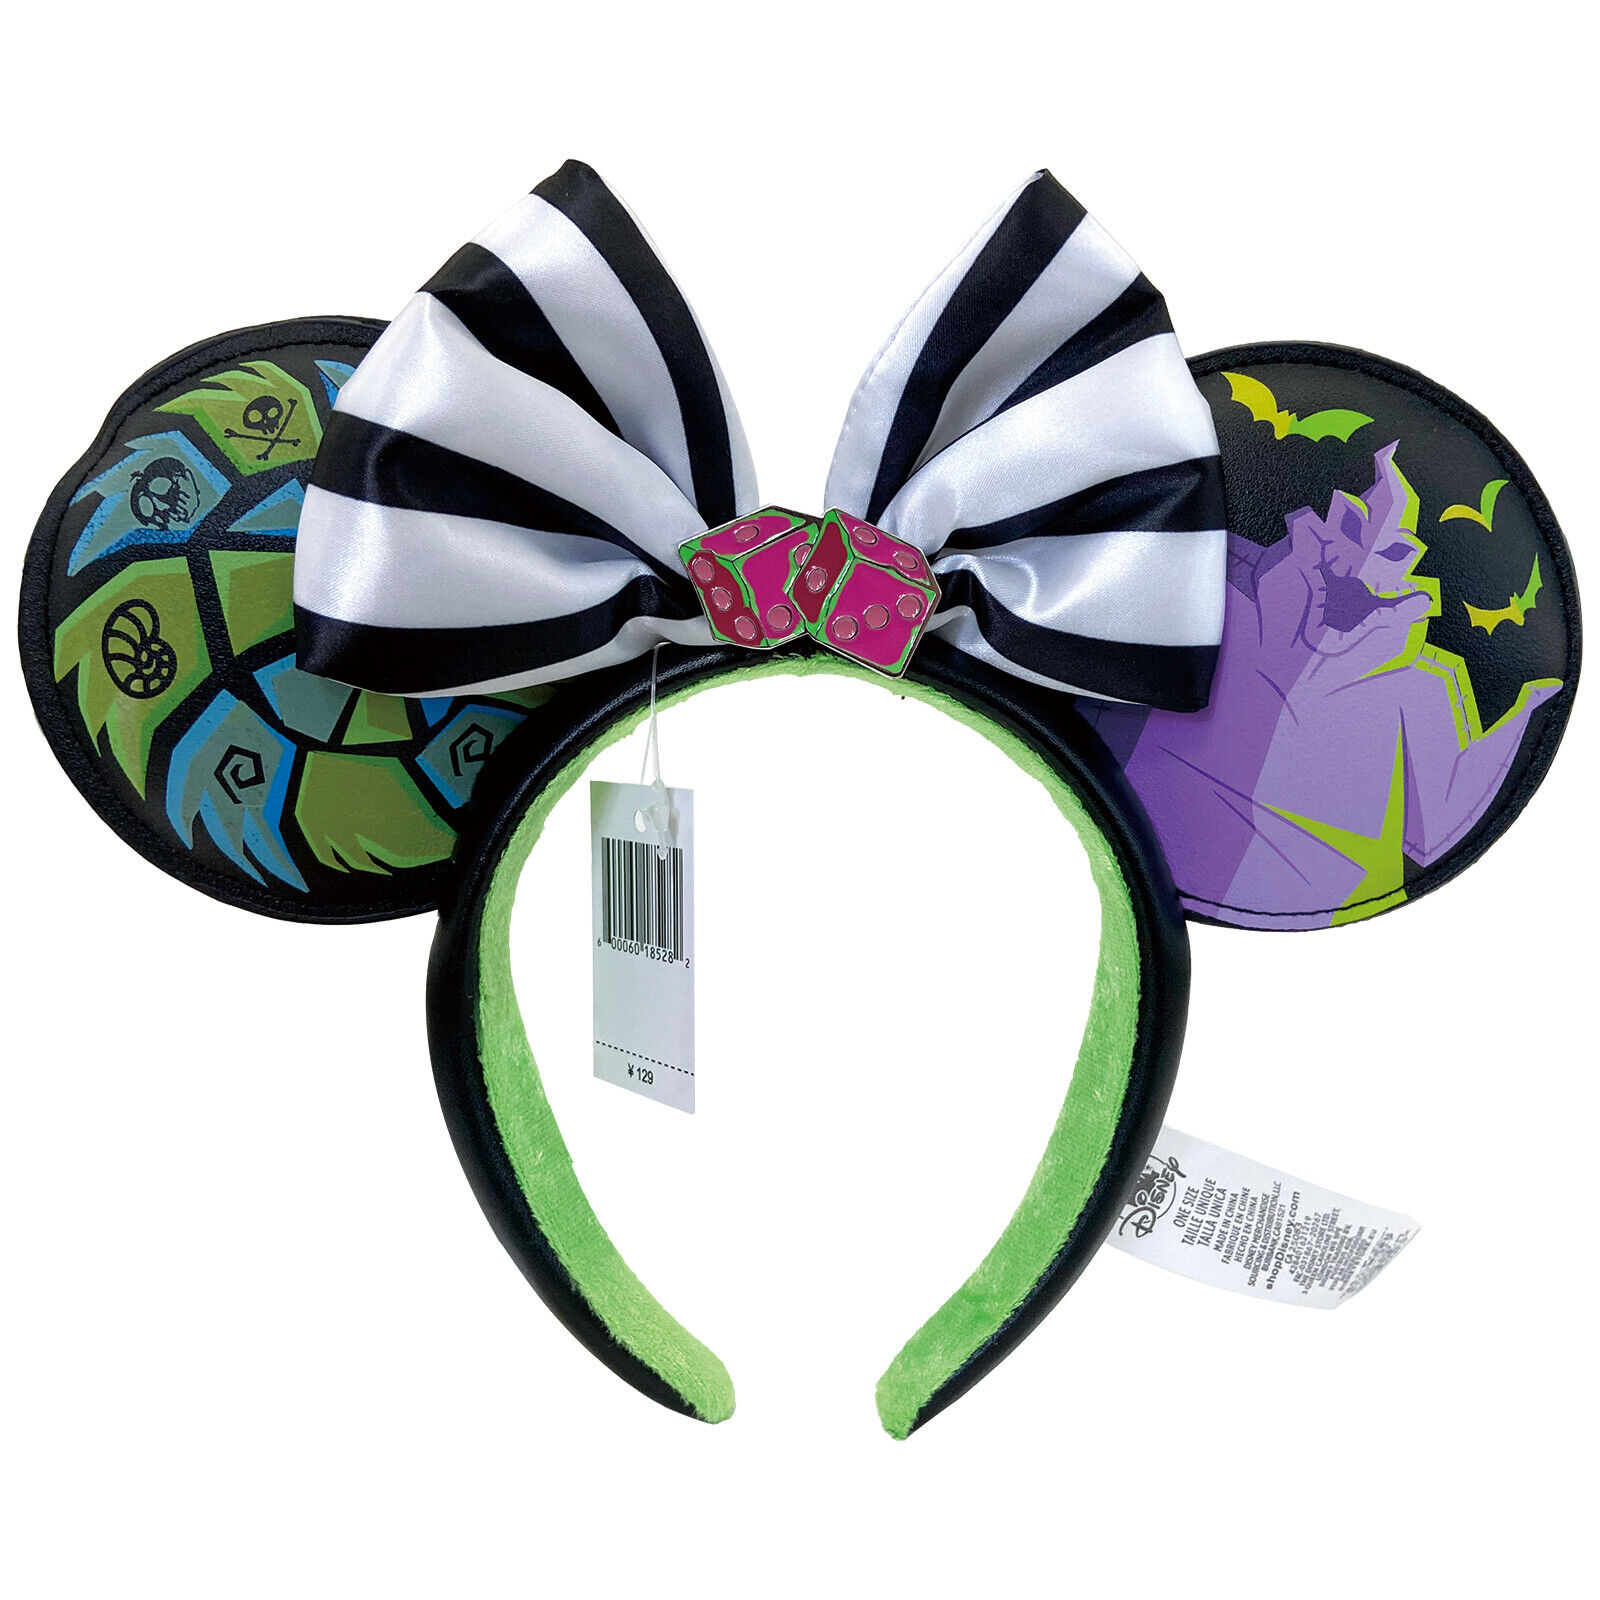 DisneyParks White Black Minnie Mouse Bow Sequins Ears Headband New Pattern Ears